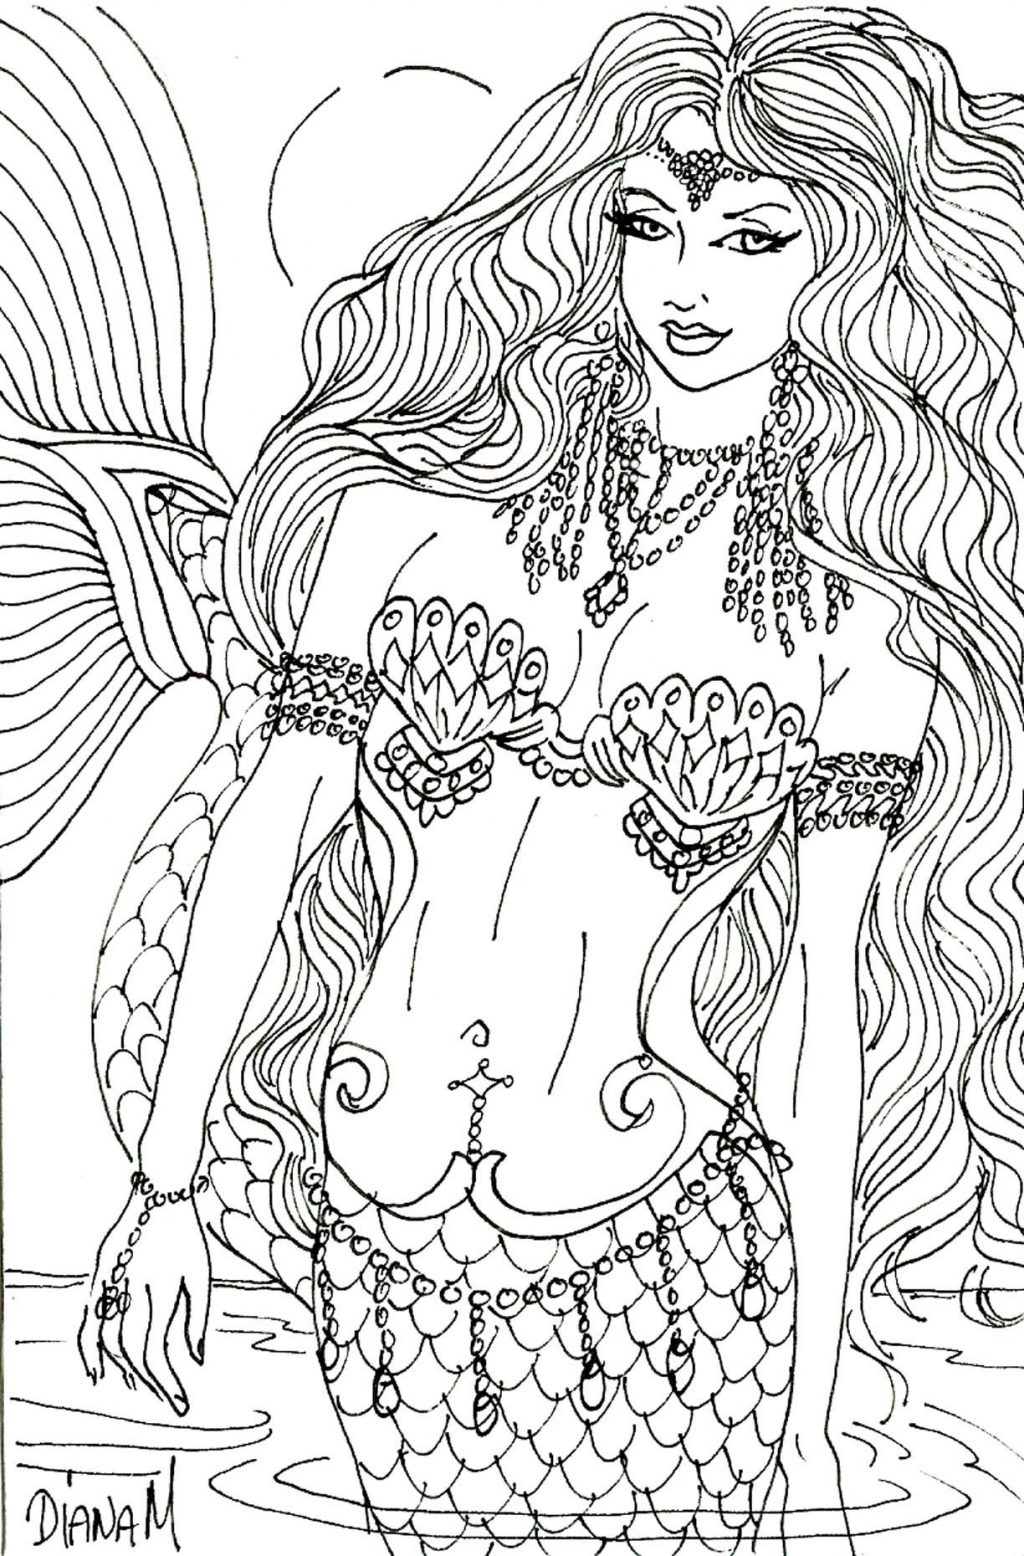 Detailed Mermaid Coloring Pages Coloring Coloring Mermaides For Adults Enchanted Designs Fairy